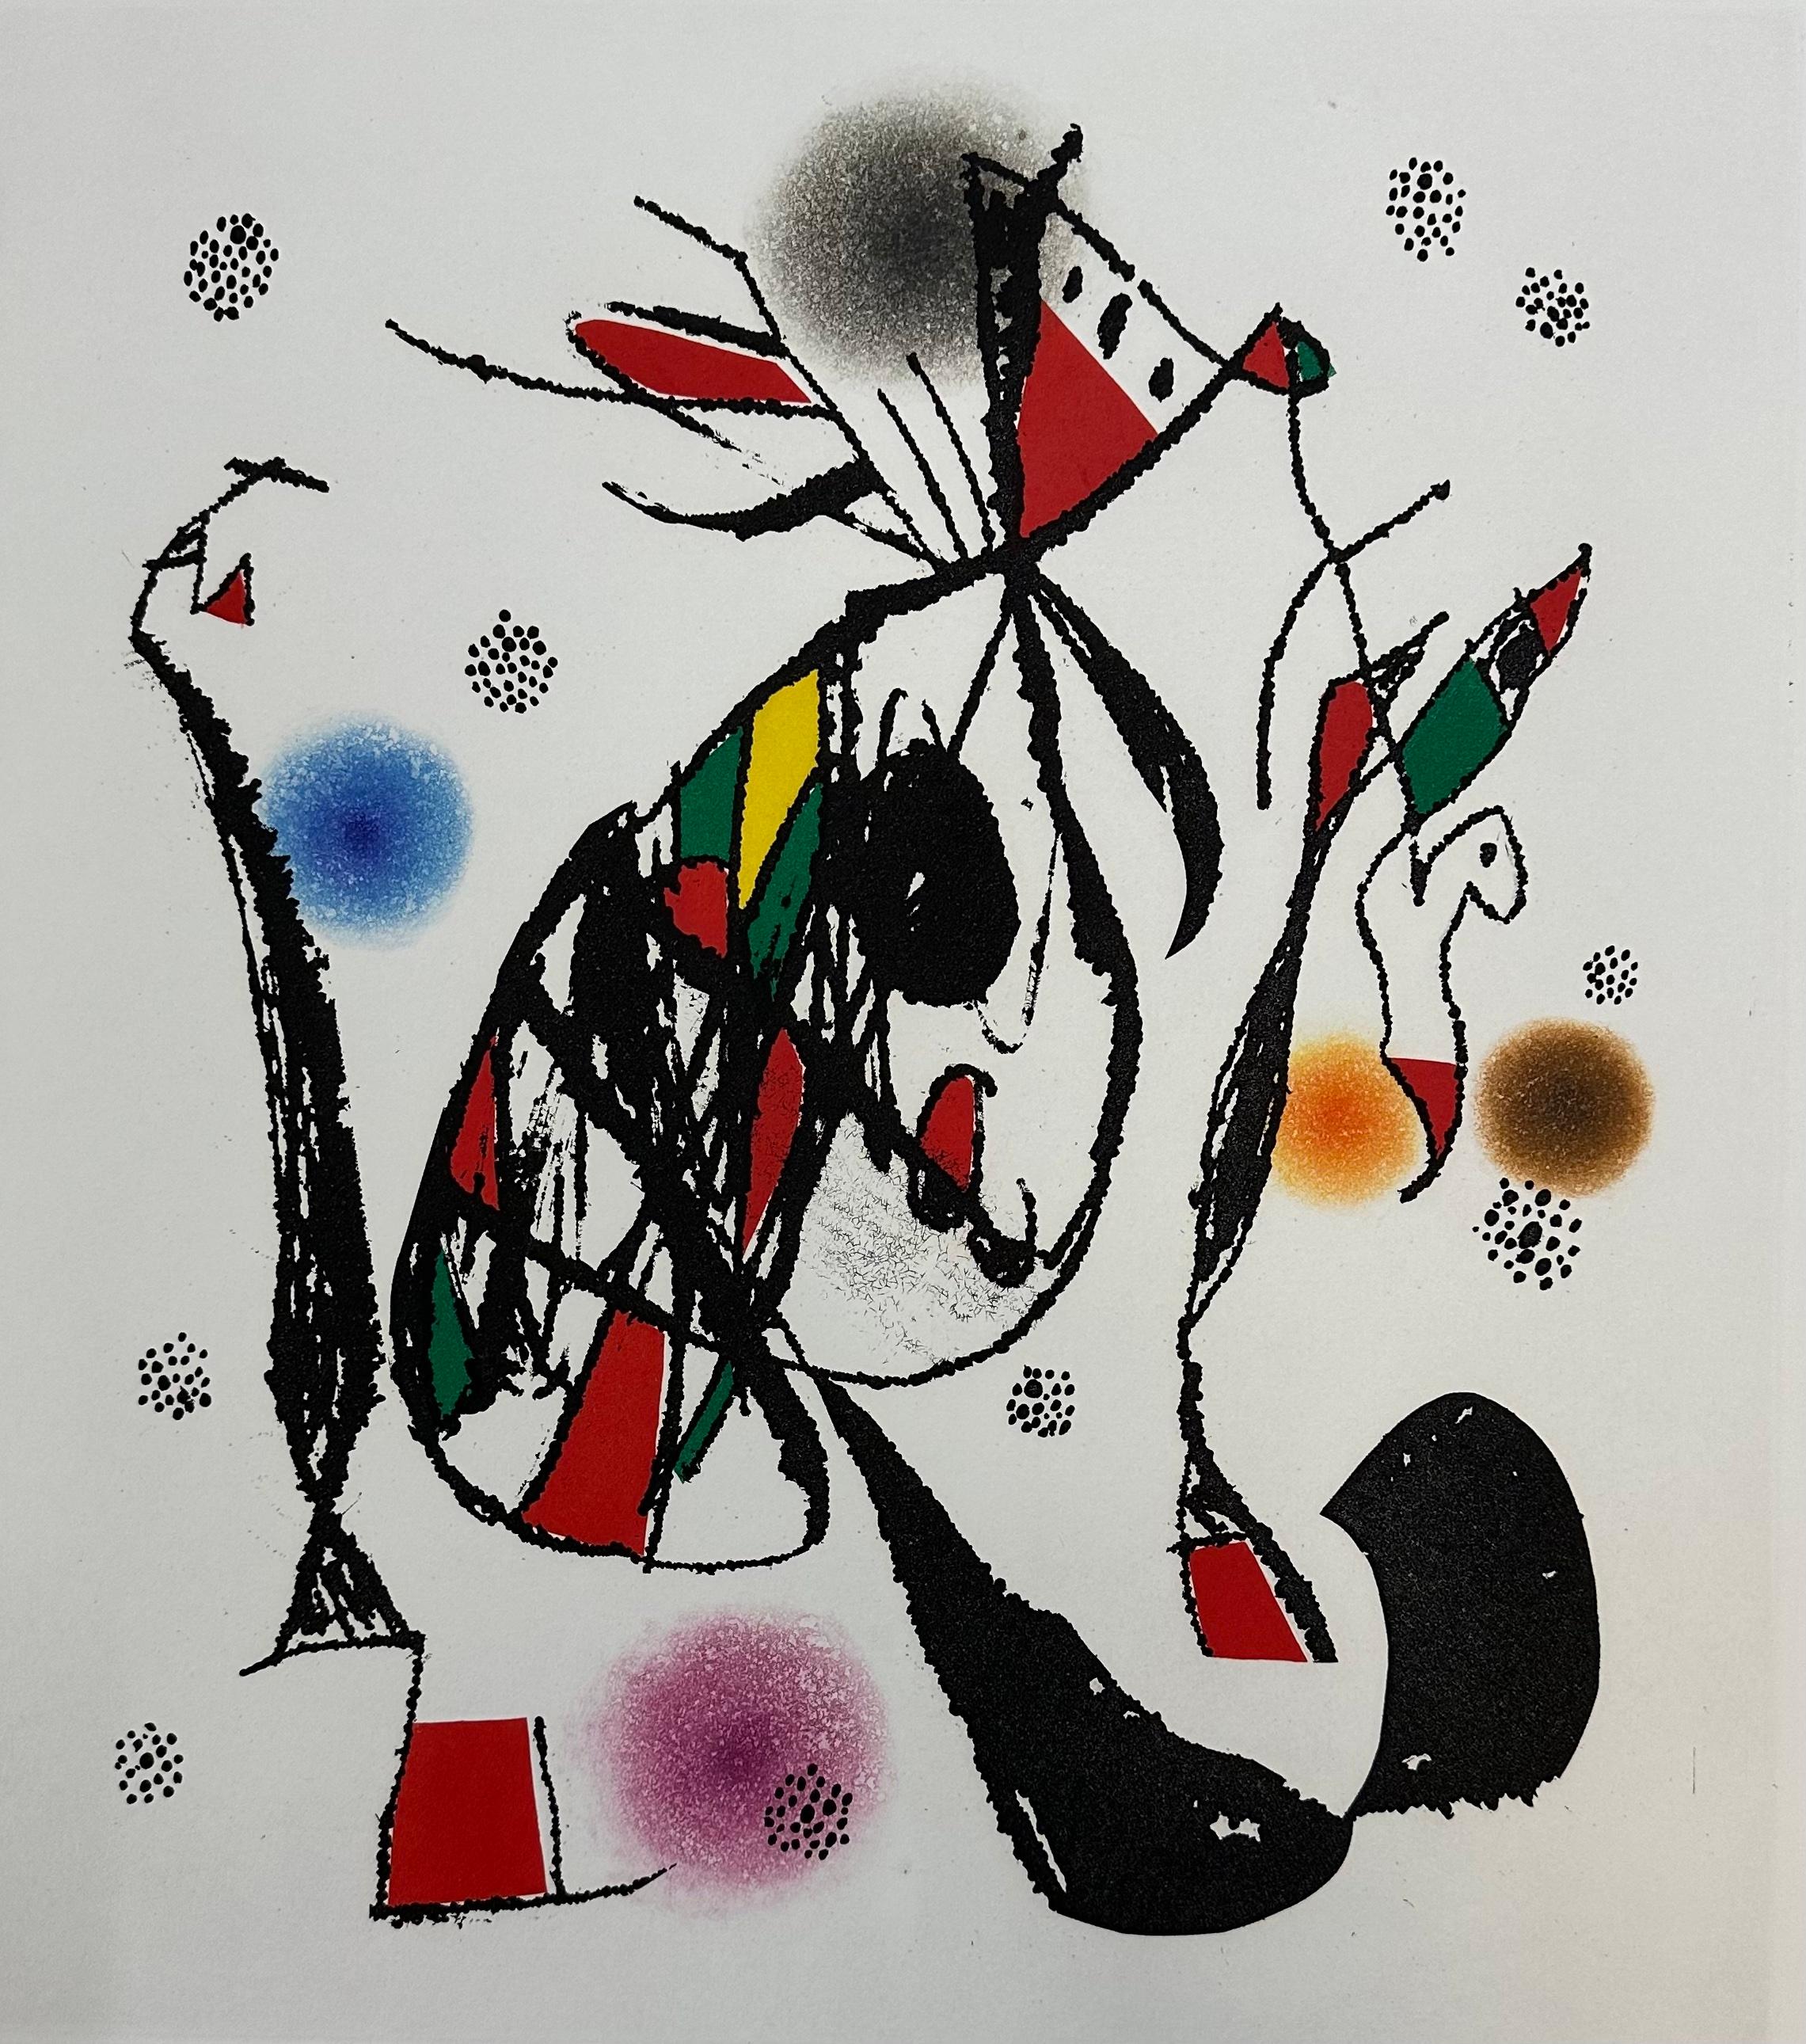 Joan Miro
Escalade de la butte
1976
Original etching and aquatint in colors on BFK Rives paper
Hand signed in pencil and numbered from the edition of 50
Published by Atelier Lacouriére et Frélaut, Paris
Reference: D.932
Image size: 19 x 17